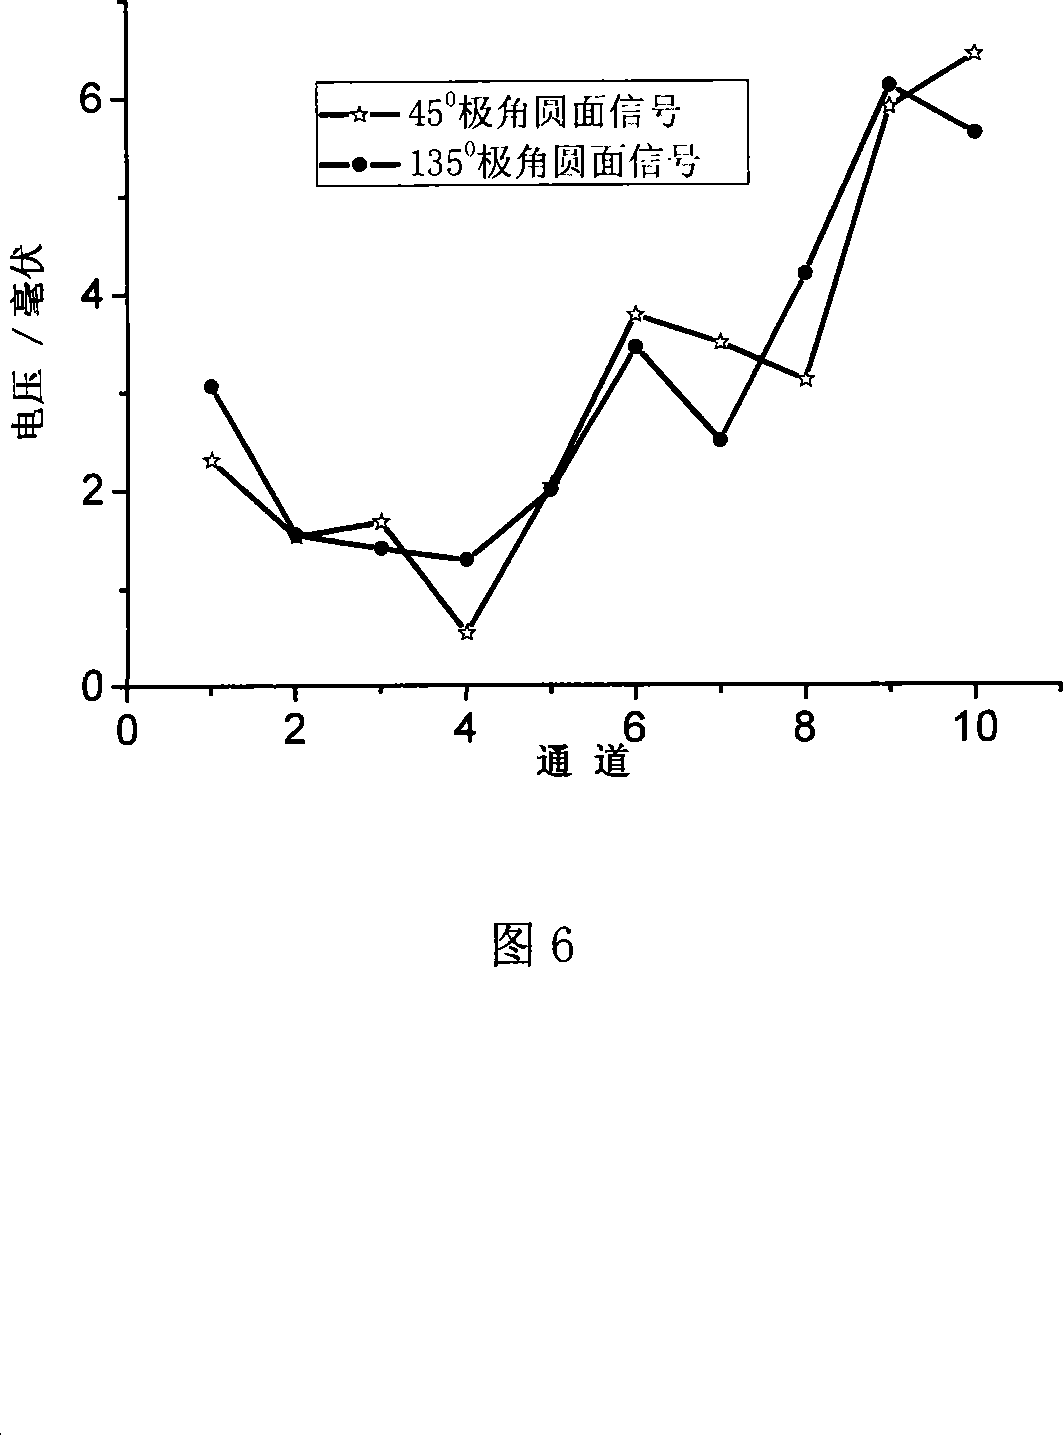 Device for monitoring micro-particles shapes and dispersion based on image